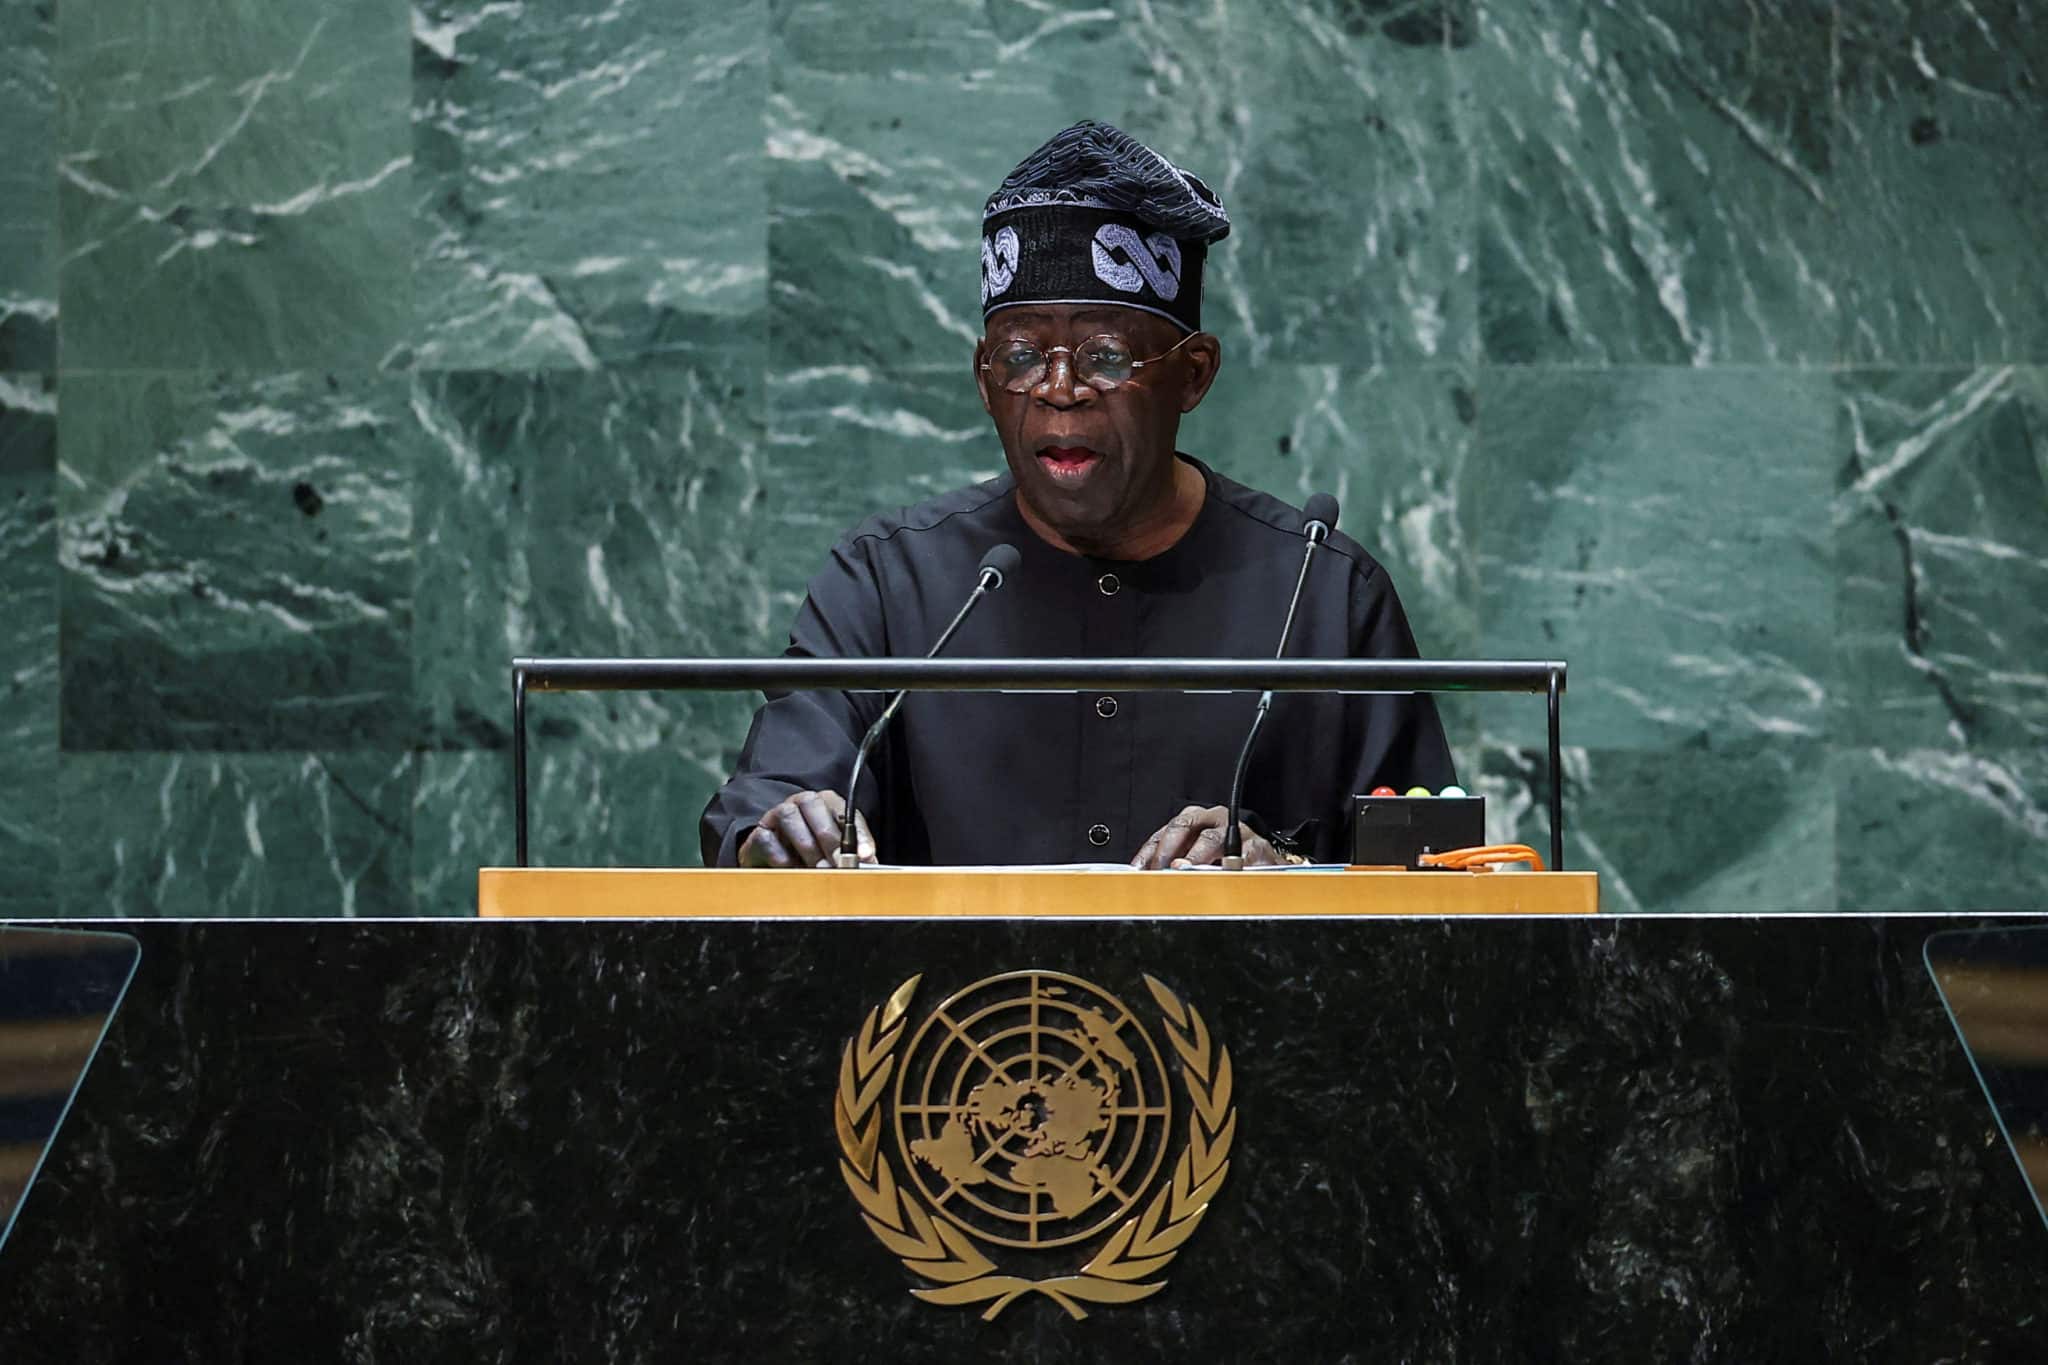 Nigeria’s Tinubu urges UN to help curb exploitation of Africa’s resources